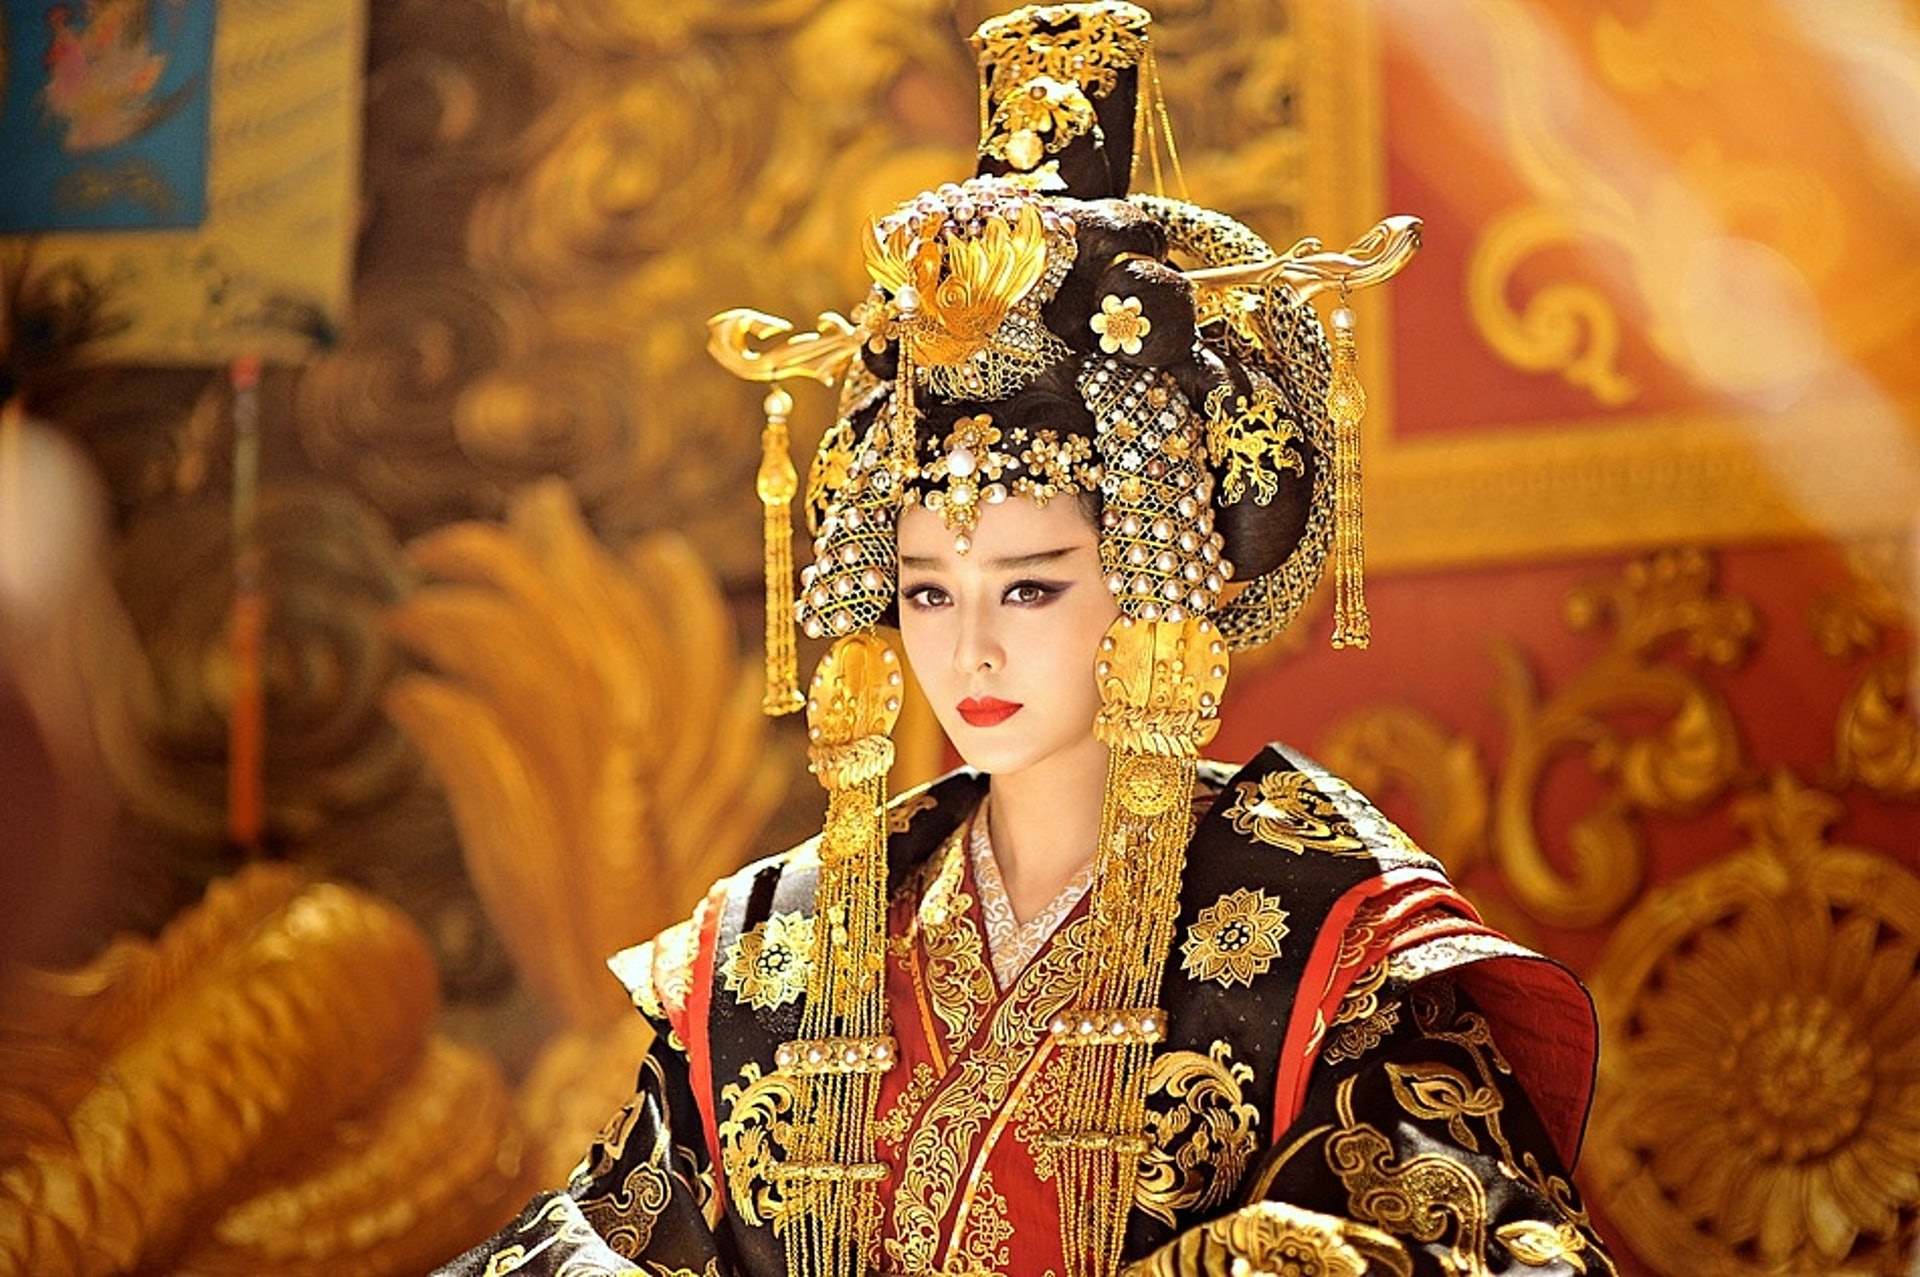 Fan Bingbing played Empress Wu in 2015’s Empress of China TV series – just one of many screen treatments of someone who was perhaps the richest woman in history. Photo: Hunan TV